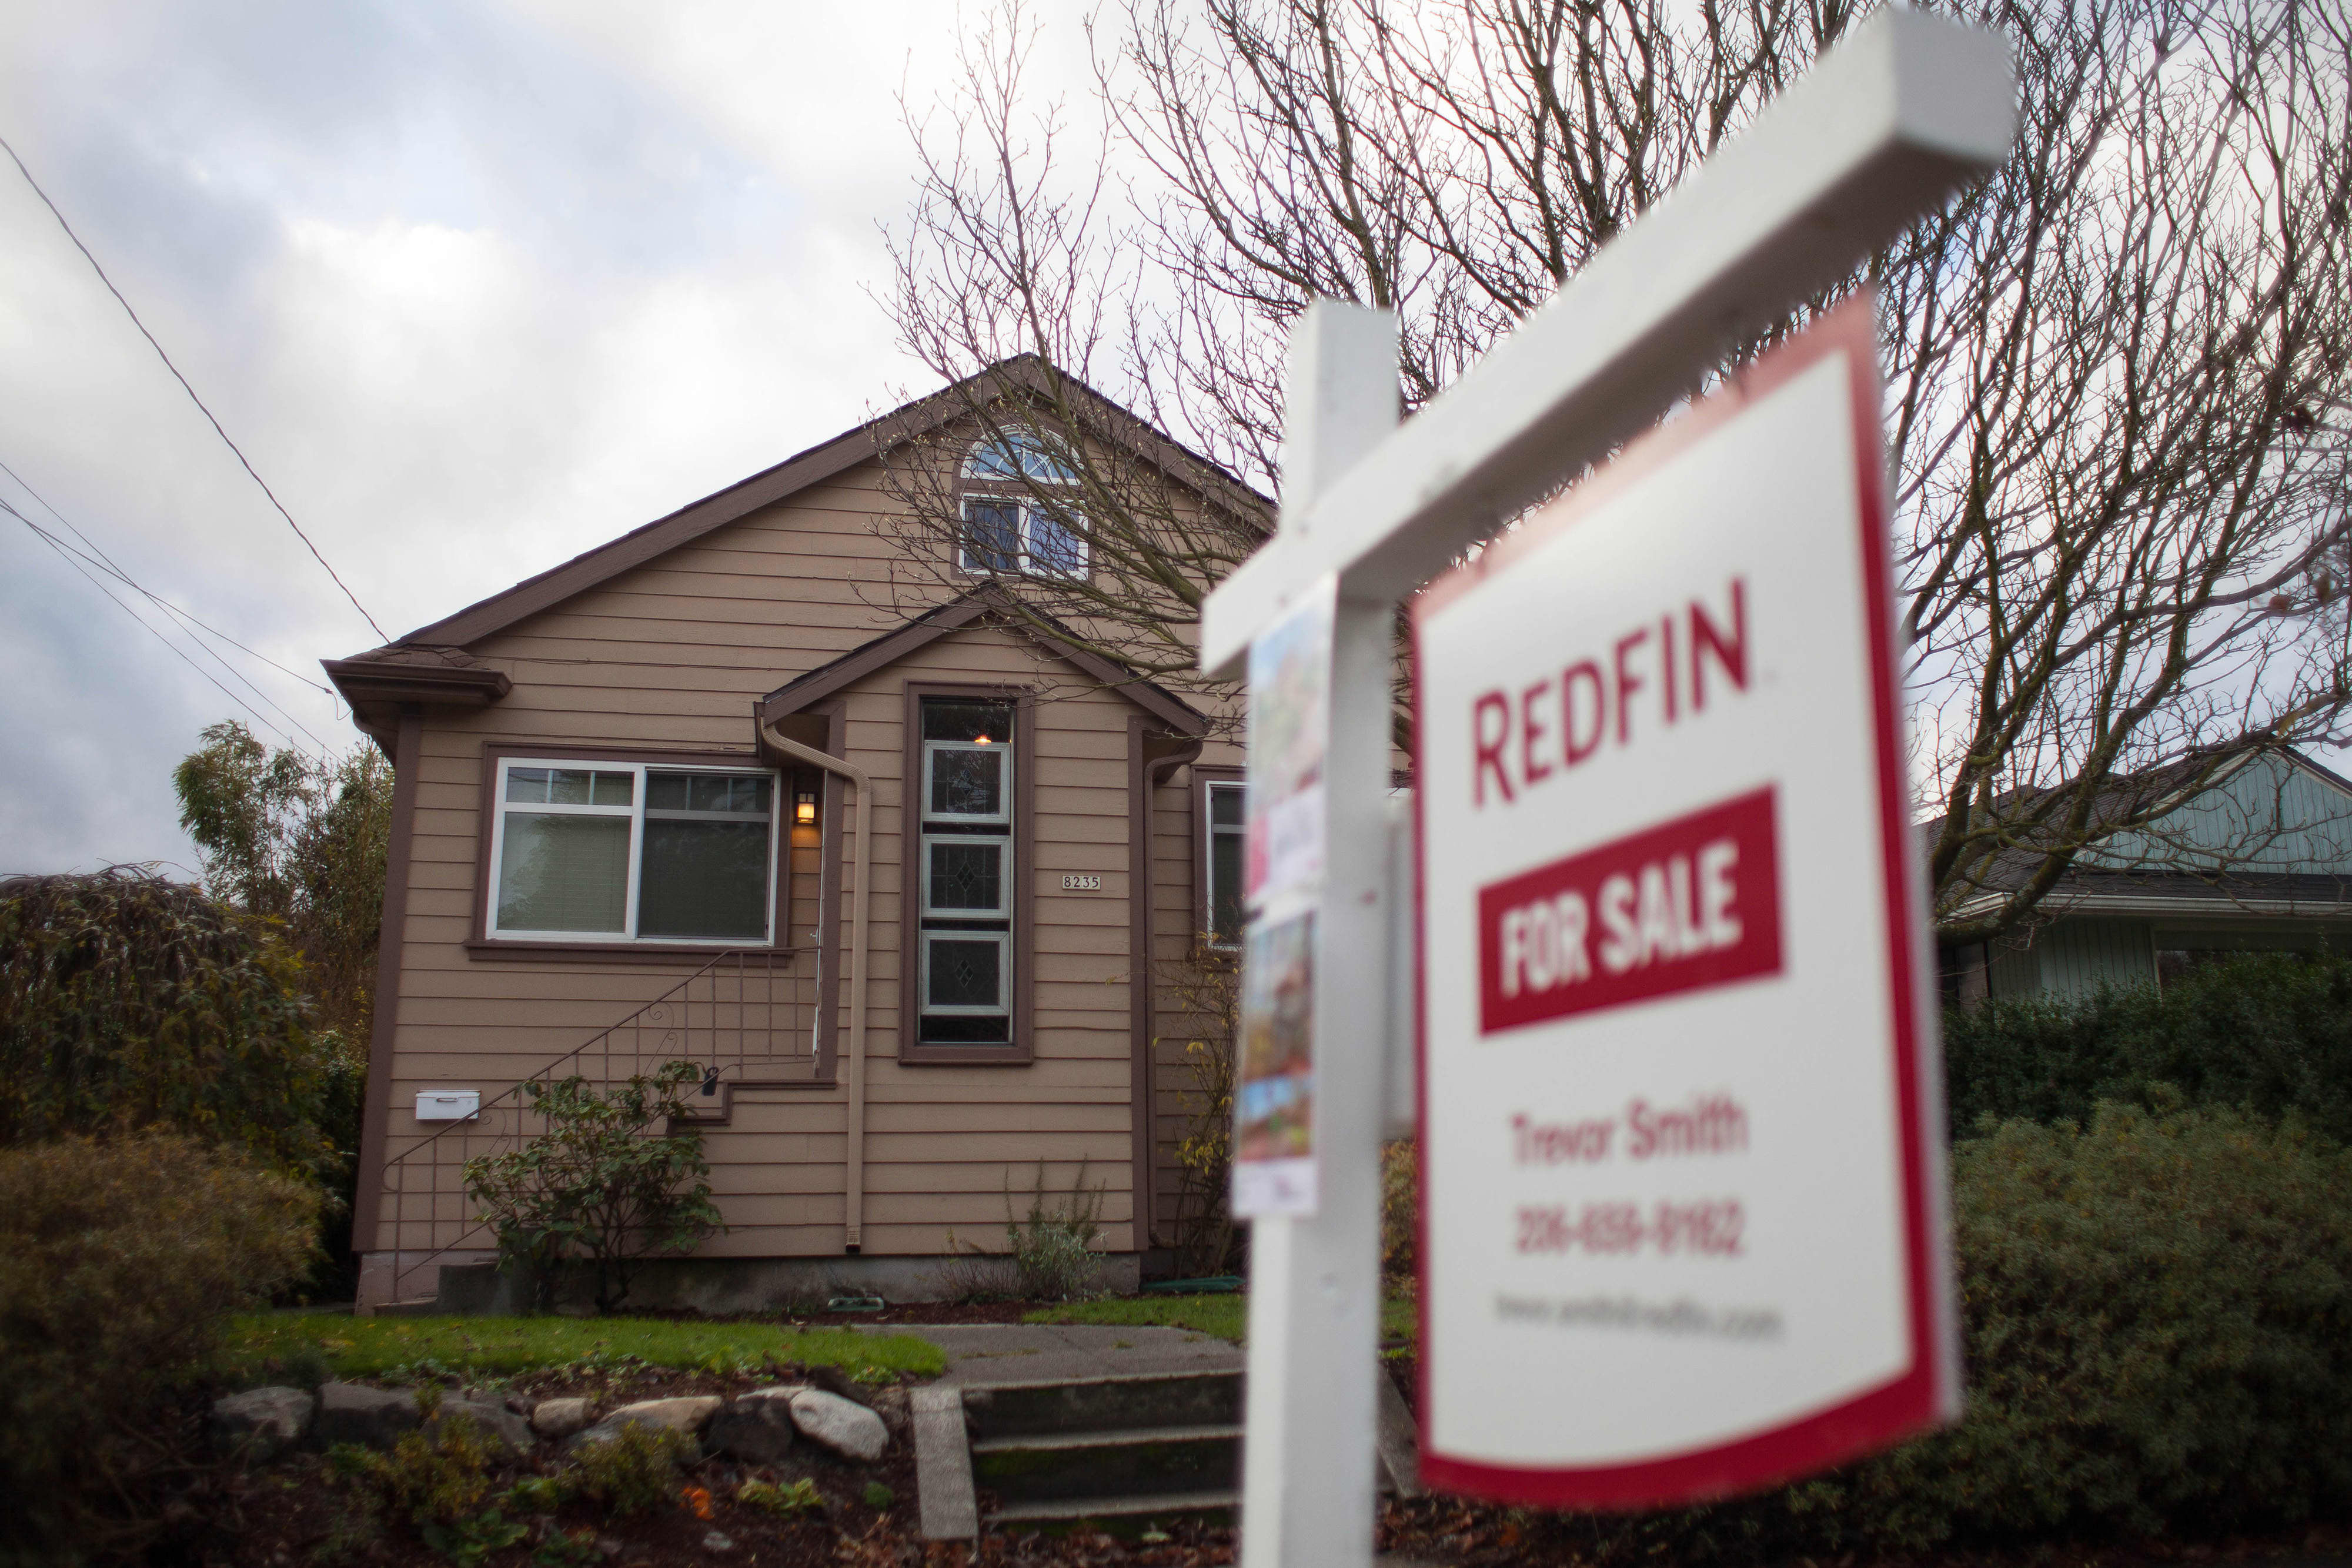 Redfin CEO says the booming Covid housing market can get even hotter